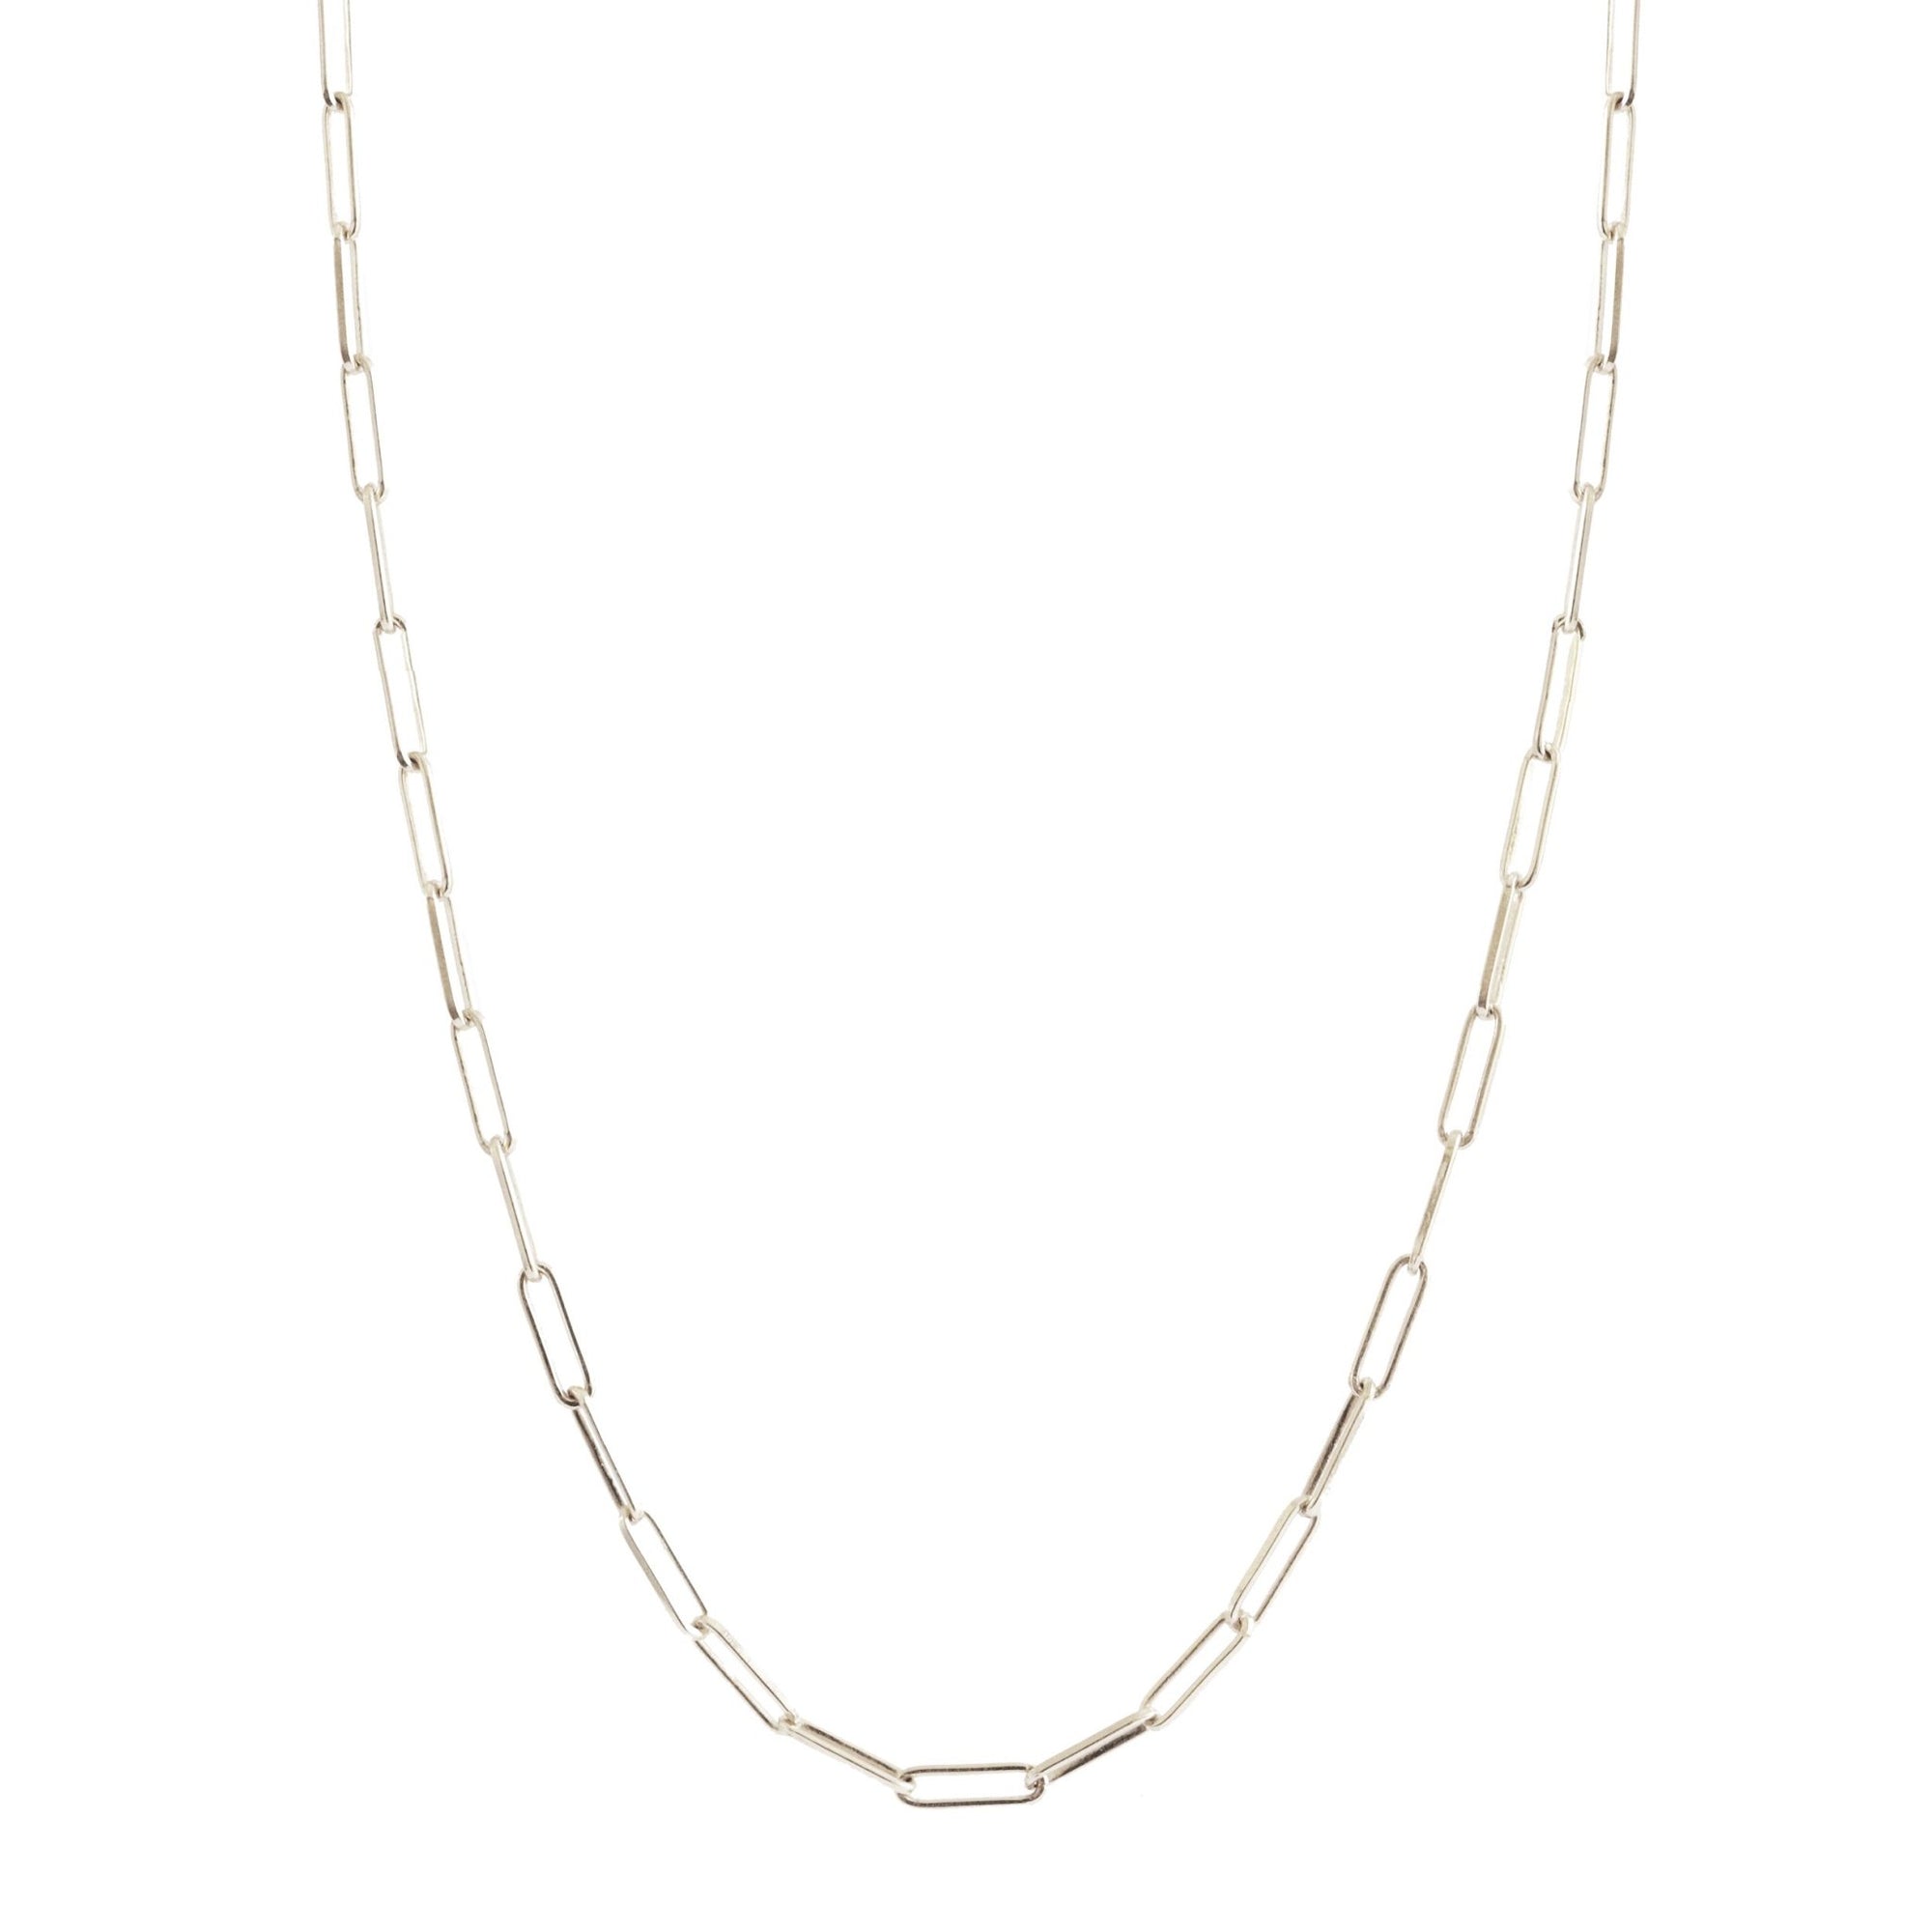 POISE MIDI OVAL LINK NECKLACE - SILVER 24" - SO PRETTY CARA COTTER